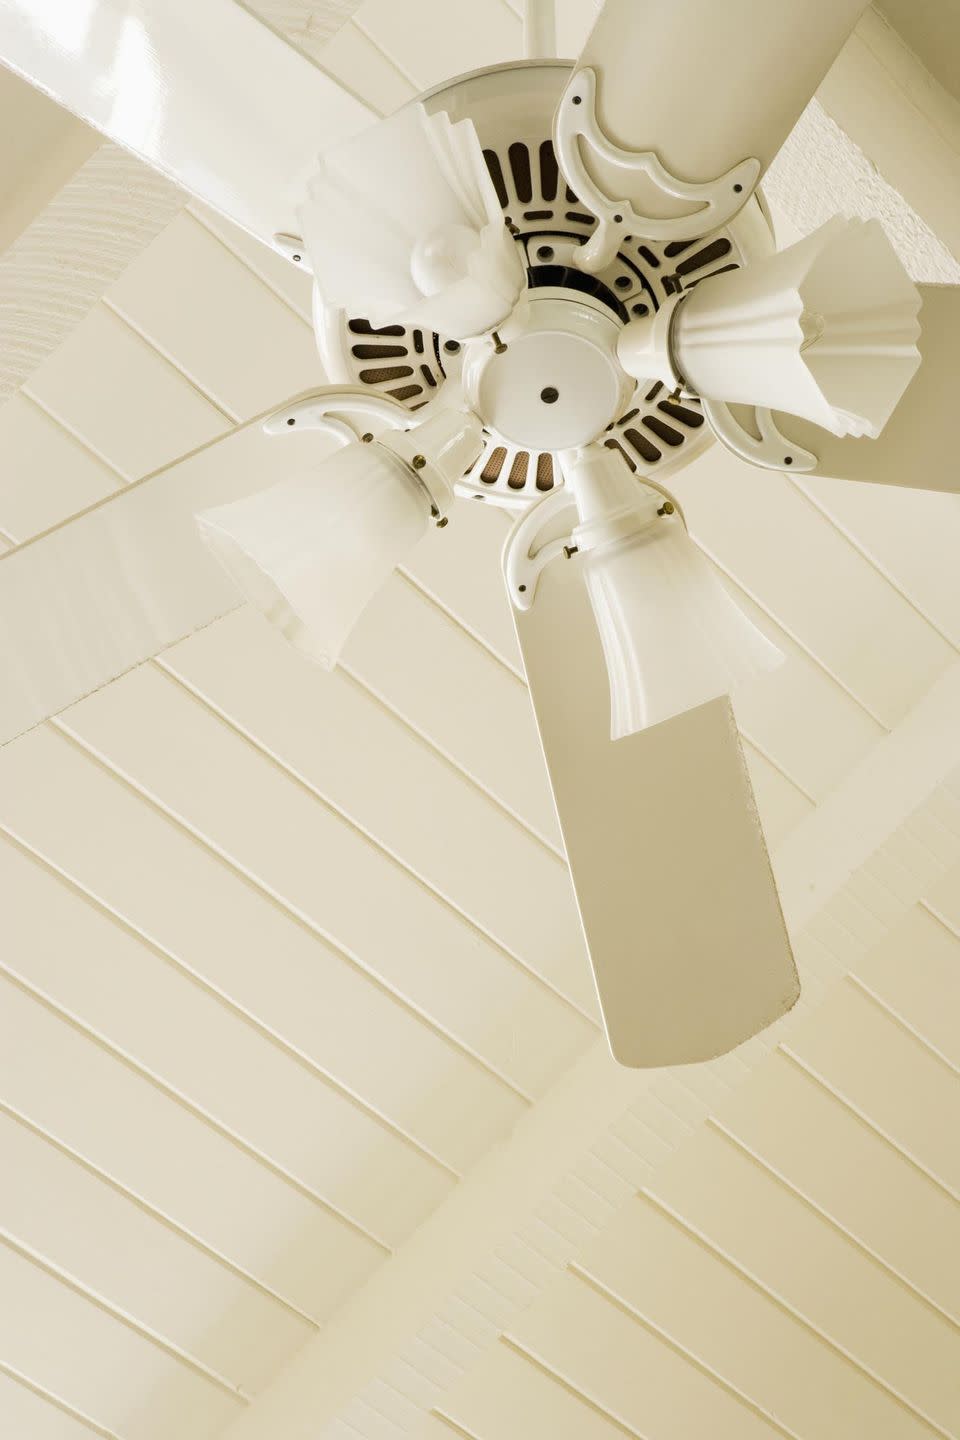 Do dust ceiling fan blades with a pillowcase.